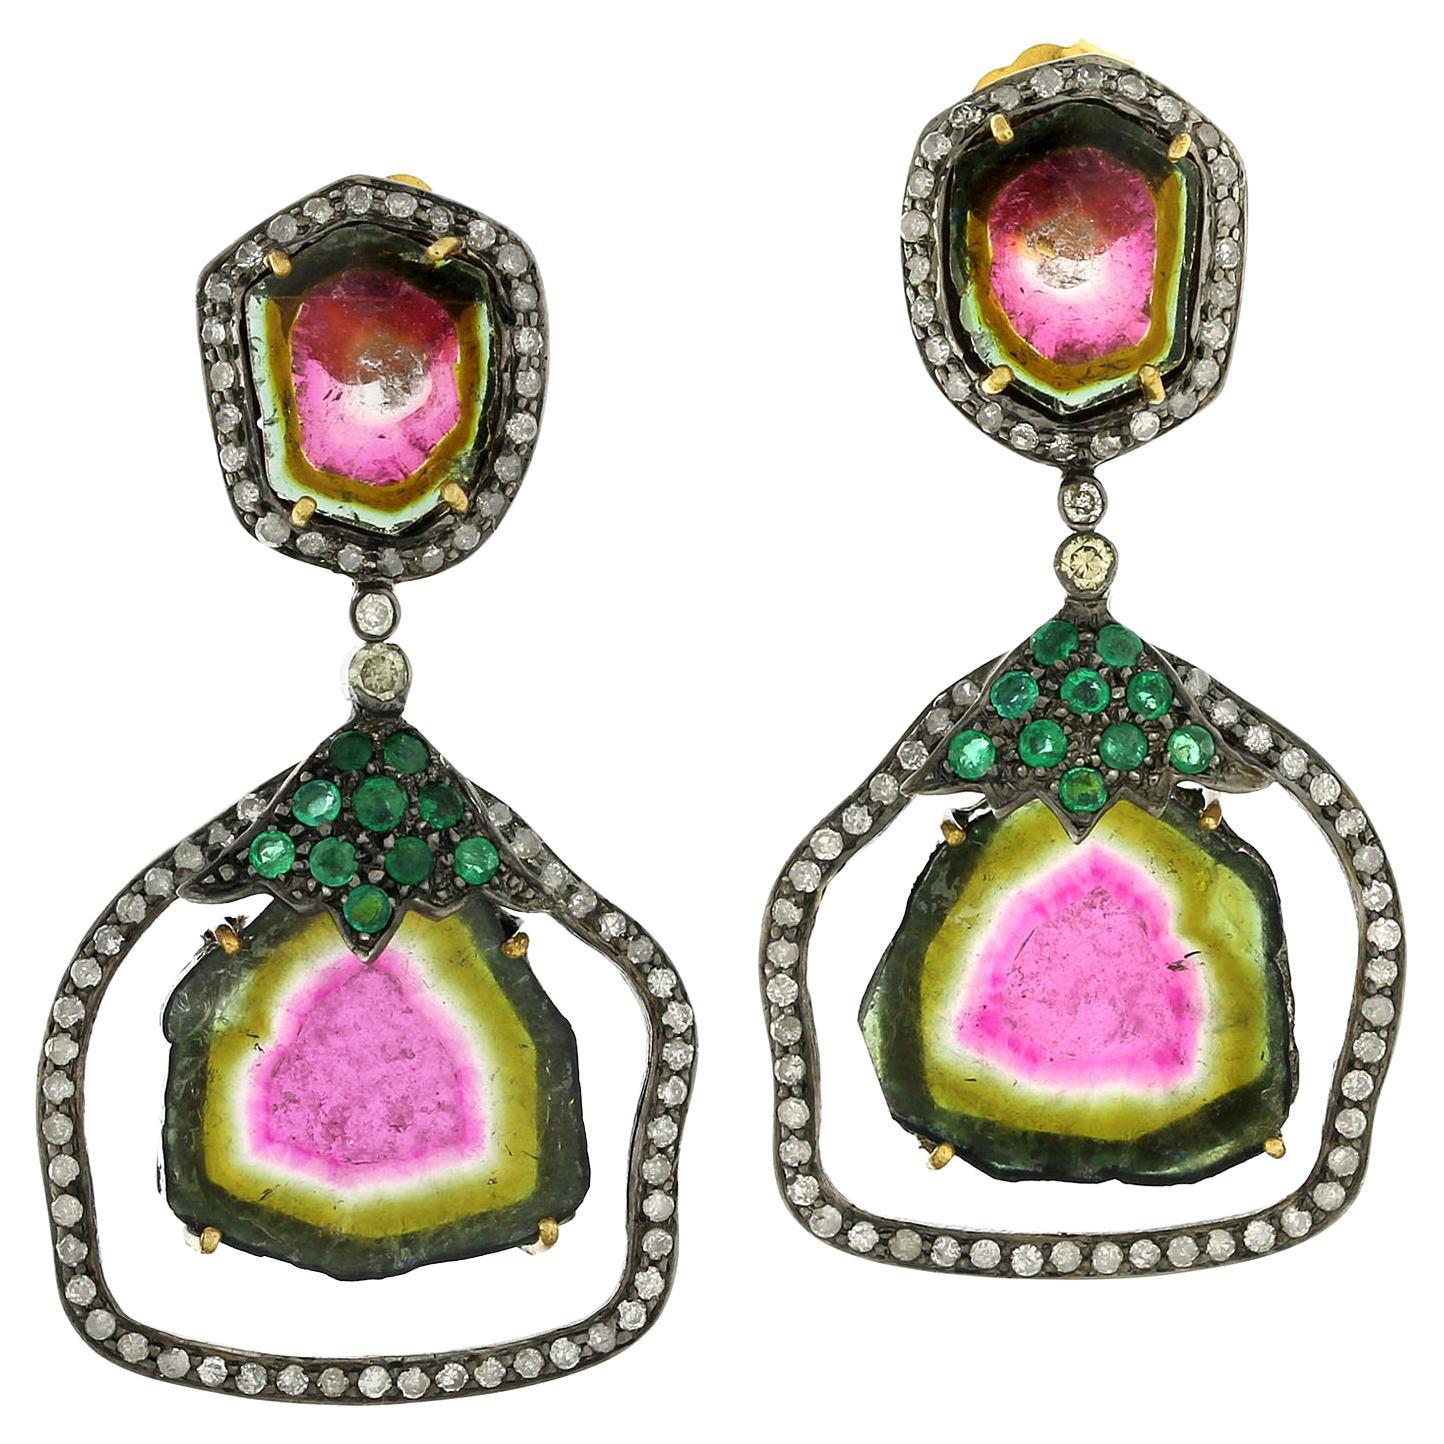 Watermelon Tourmaline Earrings With Emerald & Pave Diamonds In 18k Gold & Silver For Sale